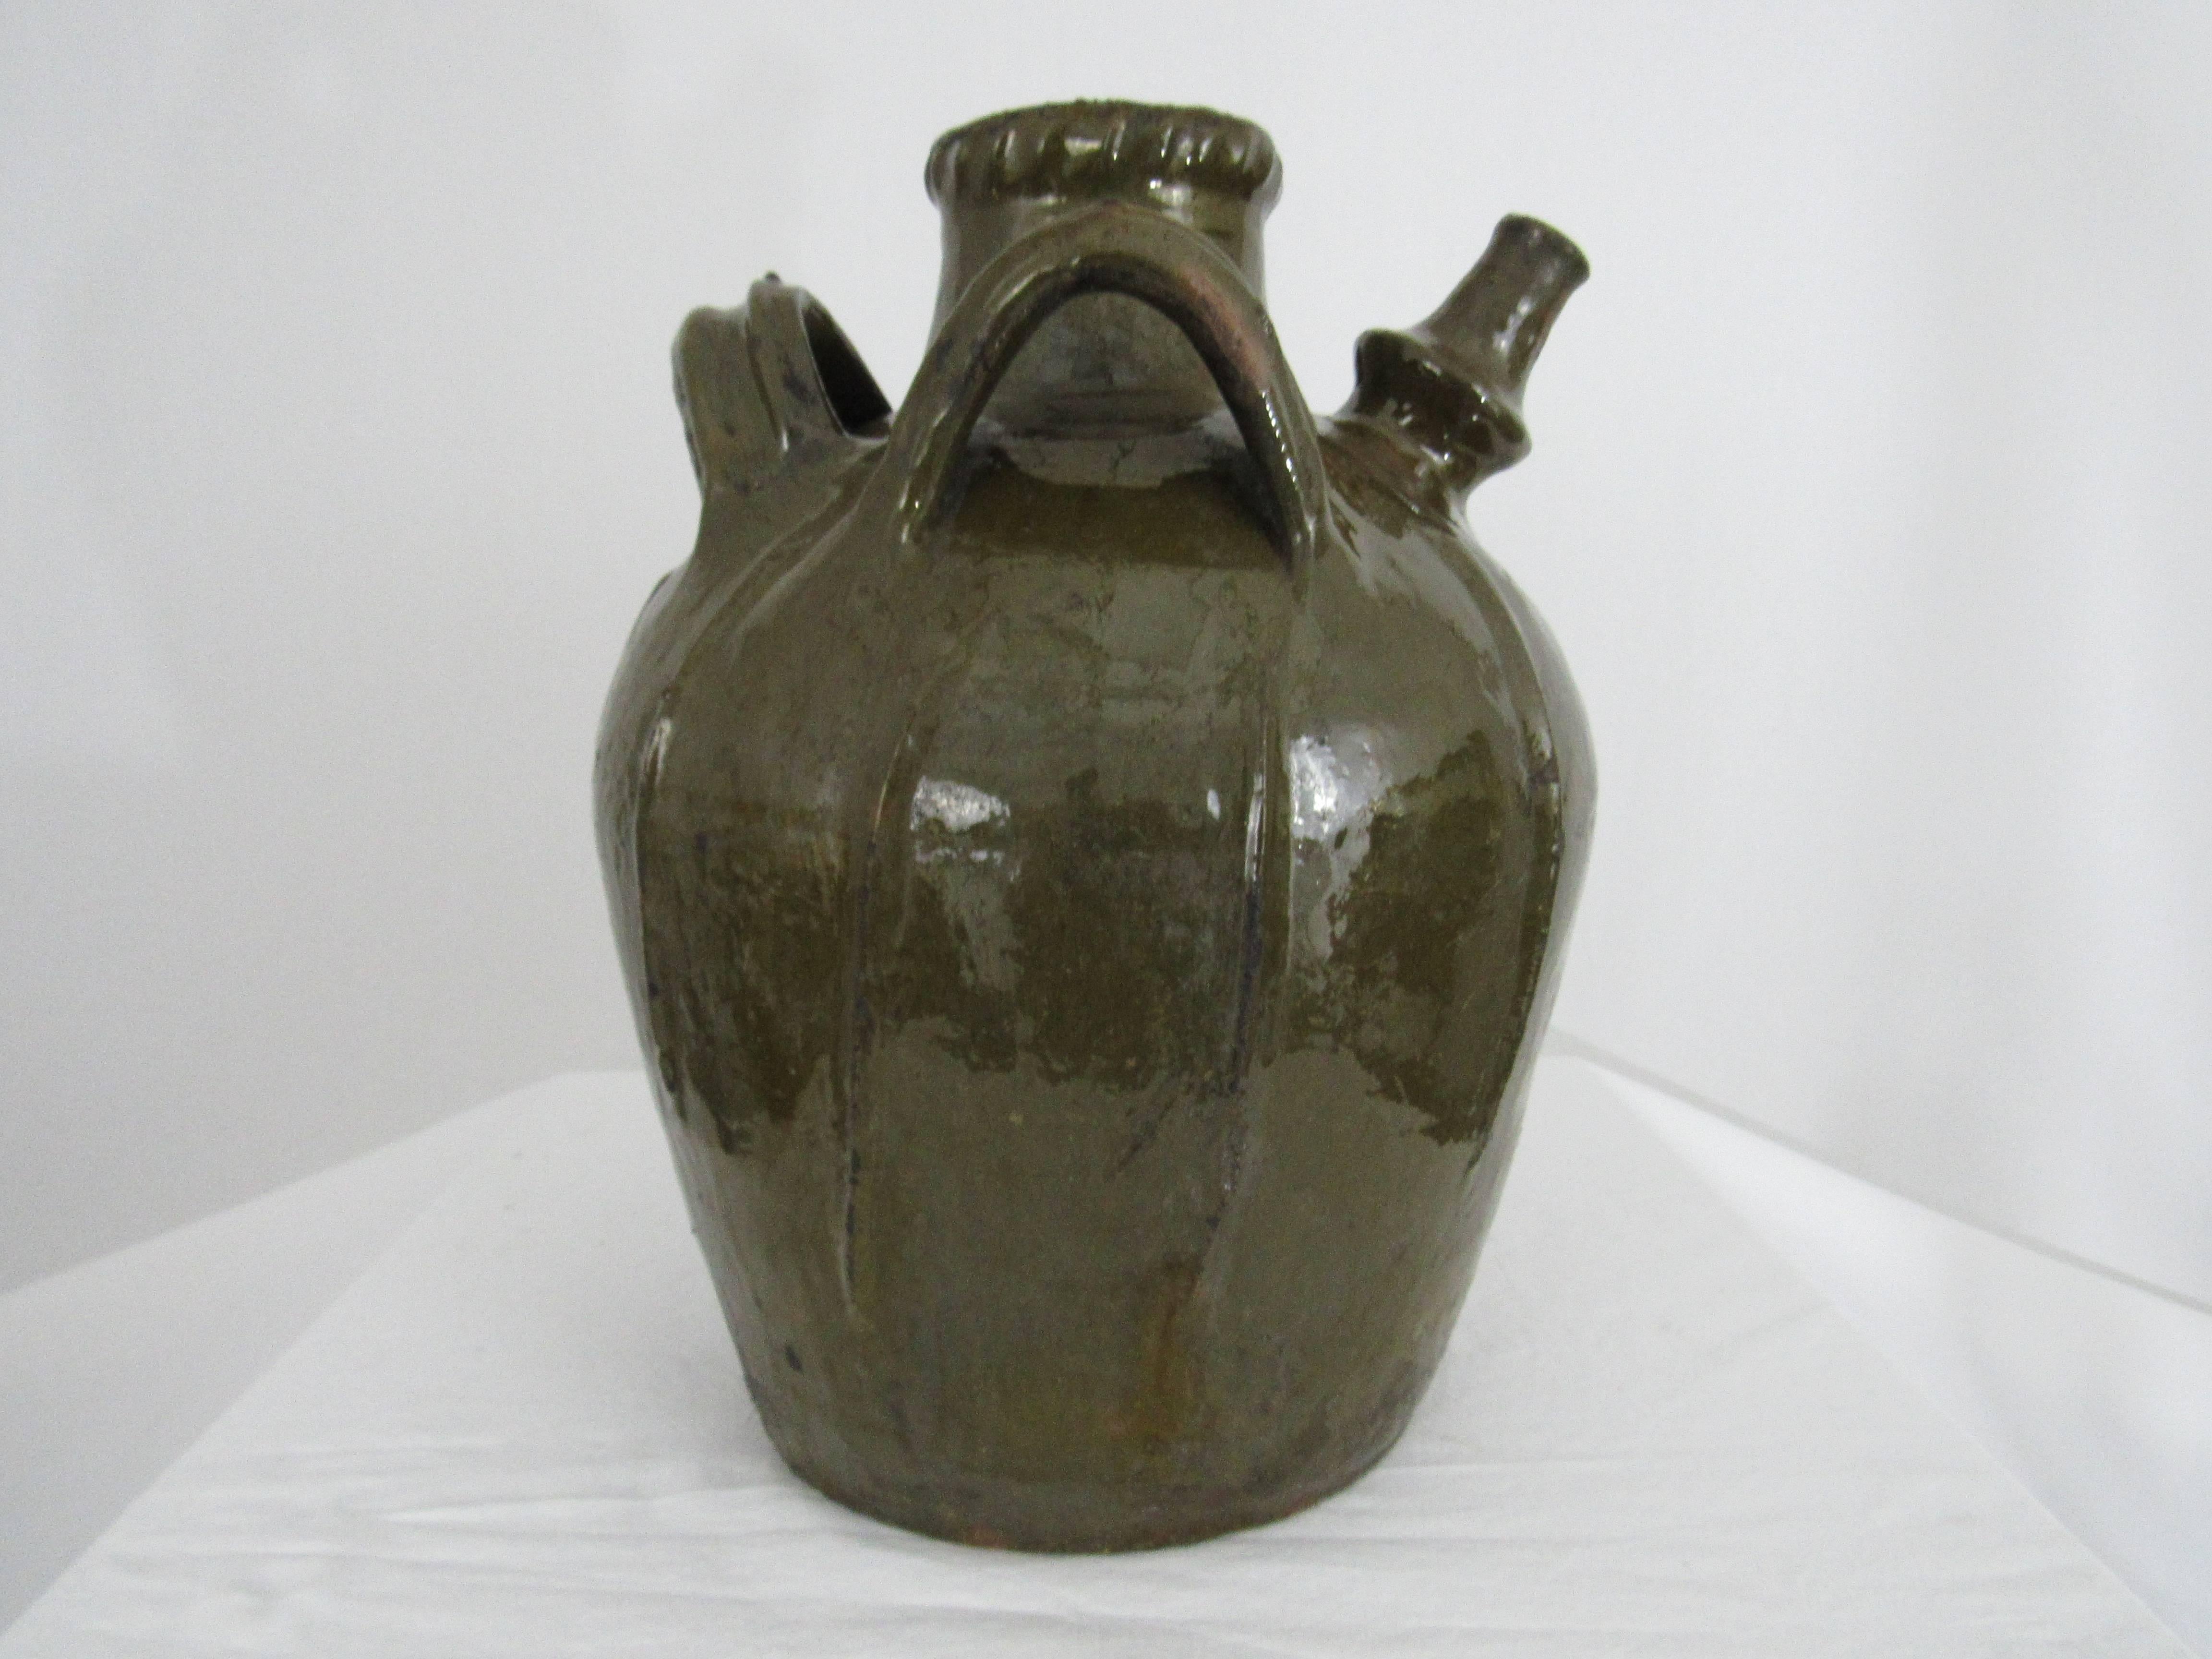 French oil jug from the Auvergne region in France. A large three-handled green-glazed terracotta storage vessel, with pouring spout. It has a wonderful green color that is characteristic of this region in France. The glaze as well as the jug is in